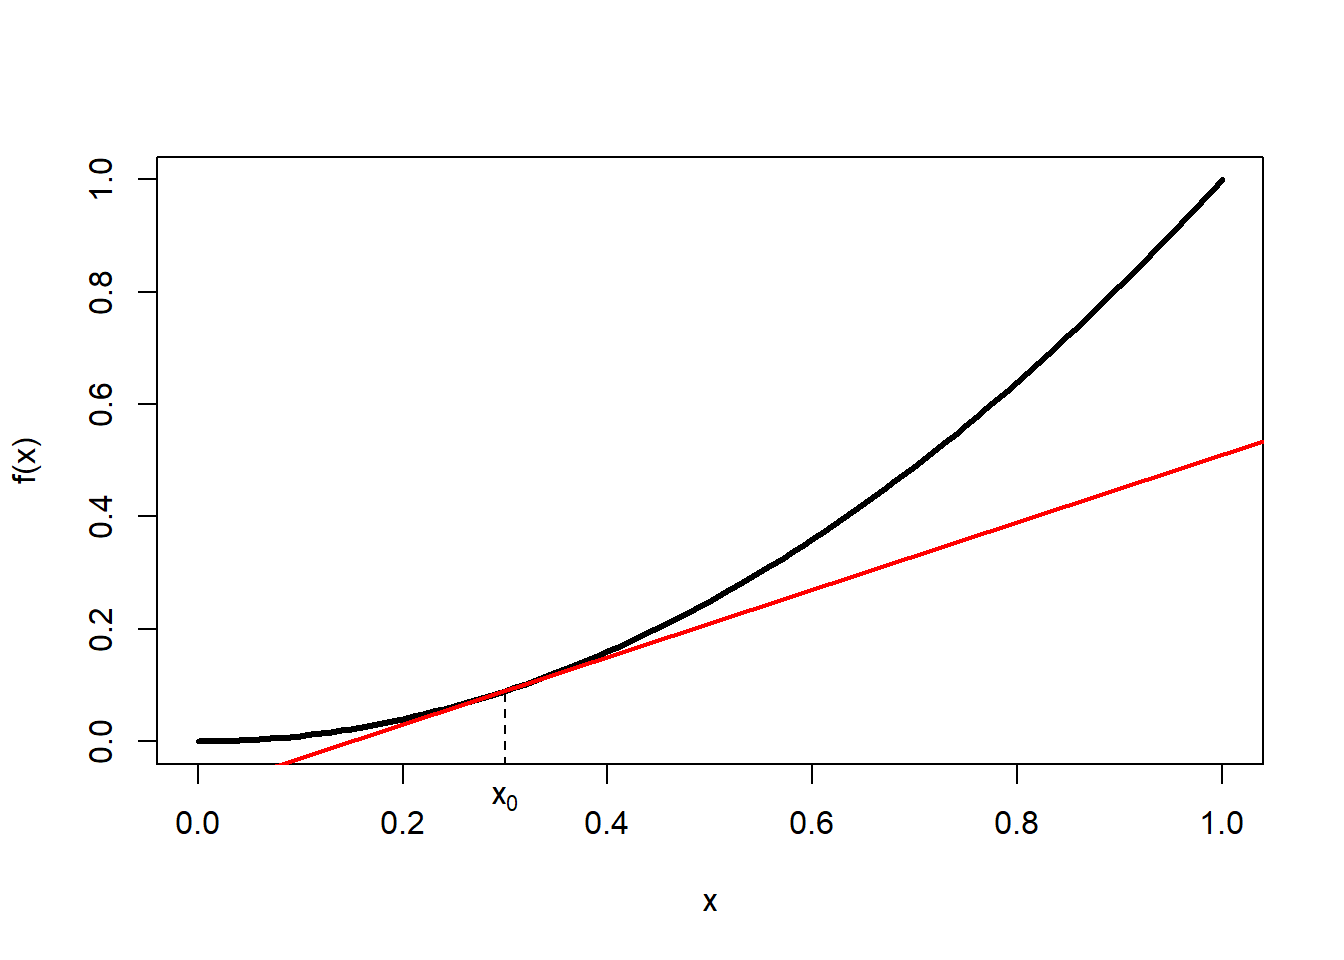 Left: Tangent line of function $f(x)$ at point $x_0$. Centre: Secant line of function $f(x)$ between point $x_0$ and point $x_0+h$; the horizontal distance between these two points is $\Delta x$ and the vertical distance is $\Delta f(x)$. Right: Set of secant lines of function $f(x)$ between point $x_0$ and point $x_0+h$ for progressively decreasing increments $h$.